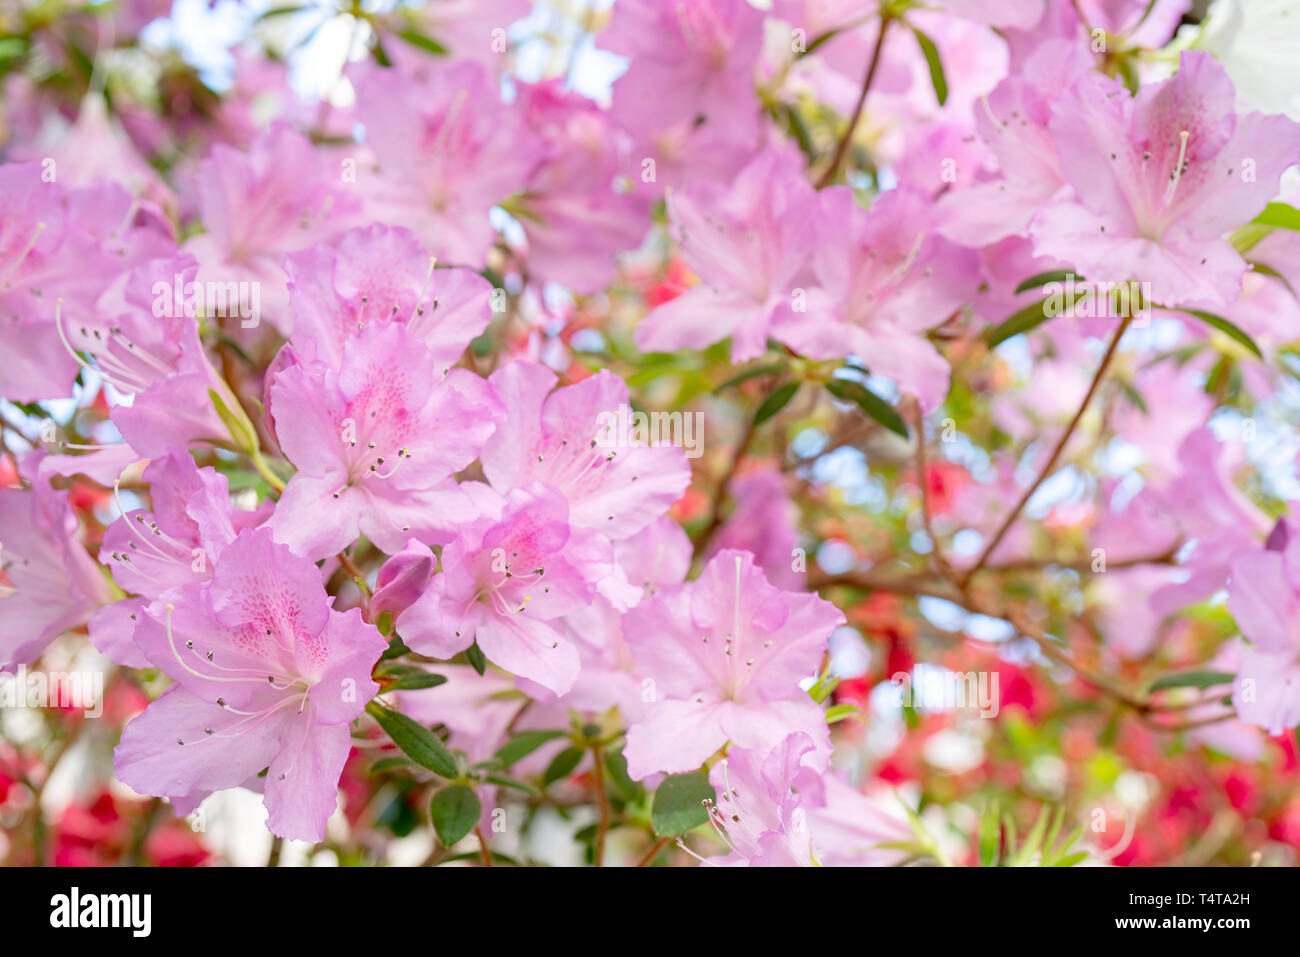 Blooming pink rhododendron (azalea), close-up, selective focus, copy space. Stock Photo